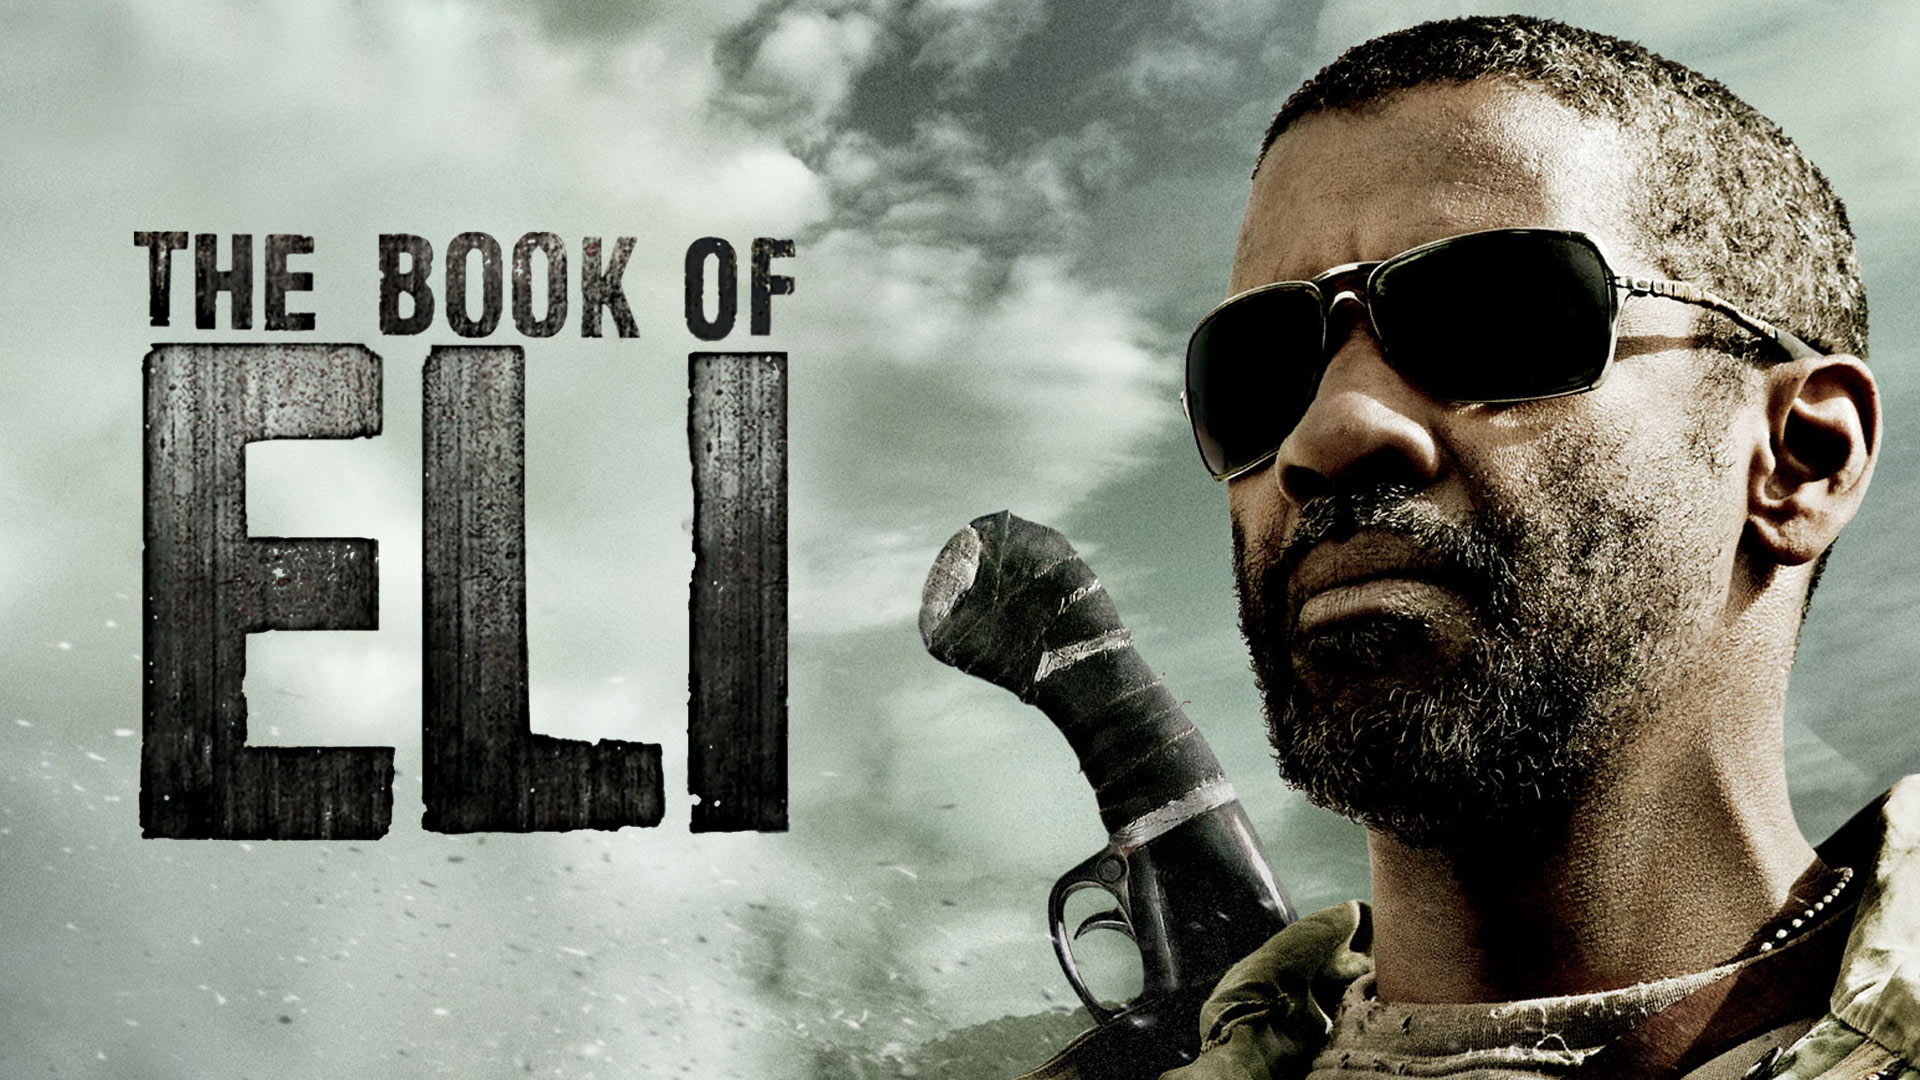 43-facts-about-the-movie-the-book-of-eli